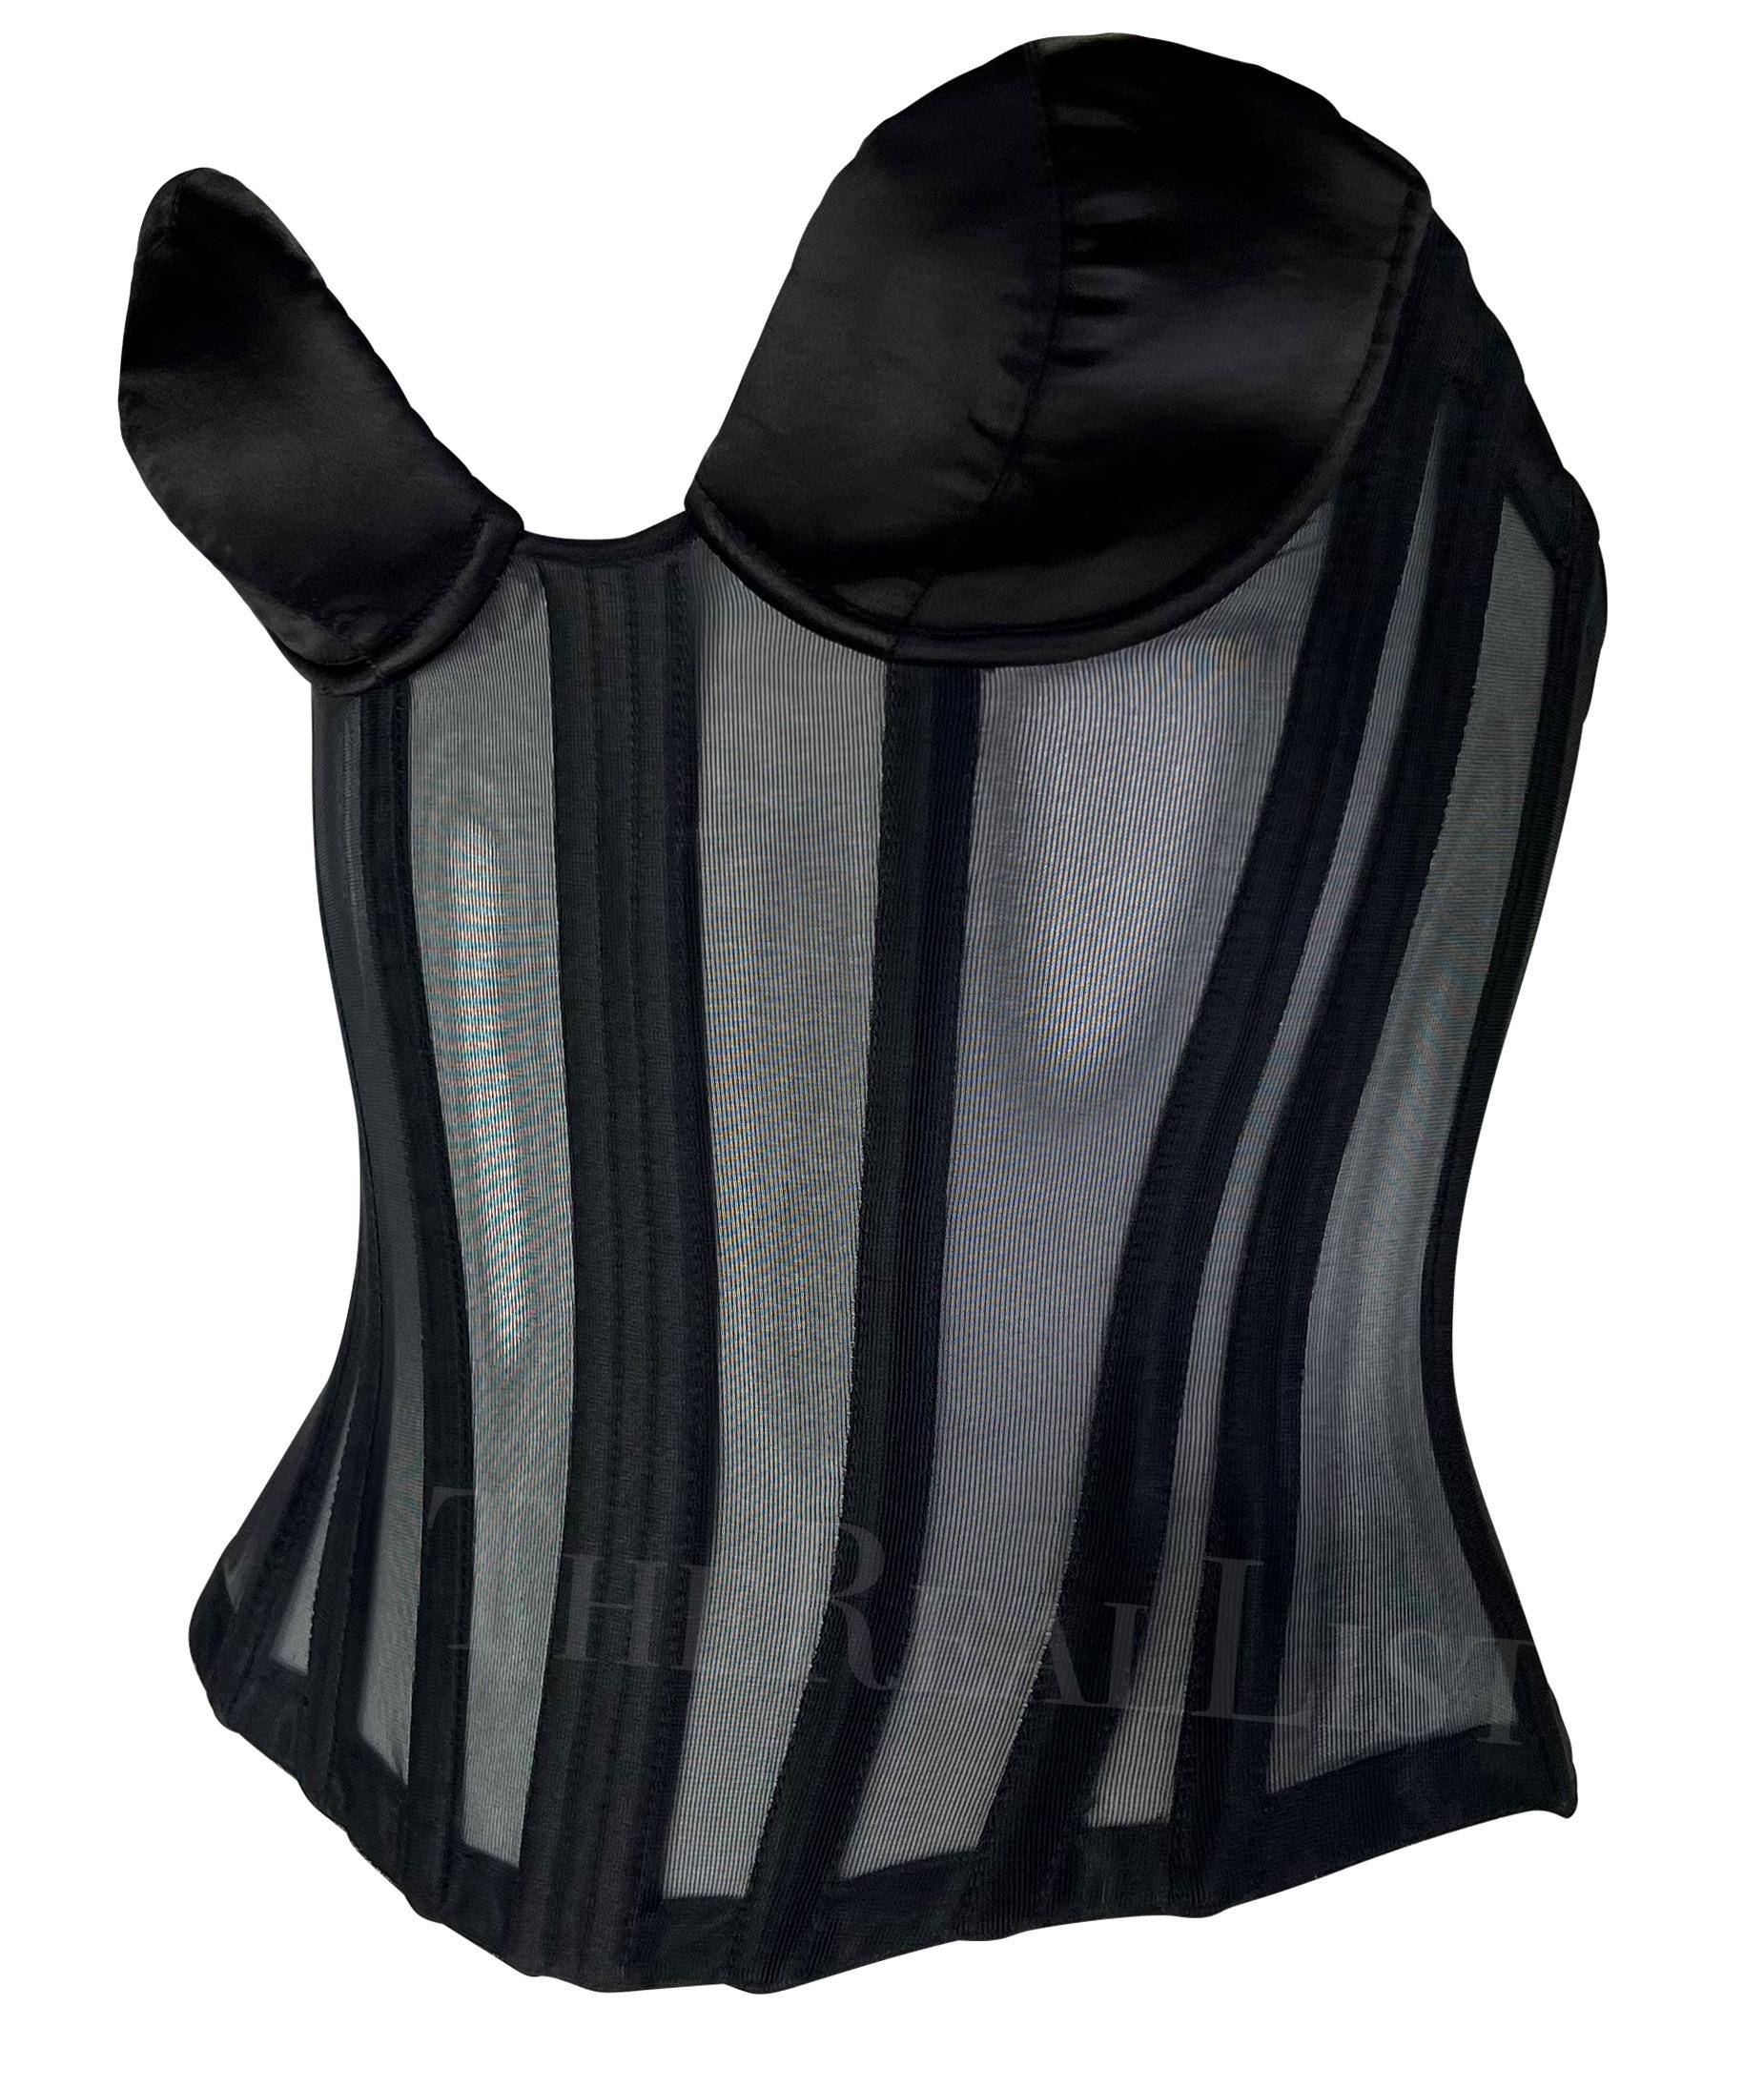 Presenting a truly fabulous black Thierry Mugler by Mr. Pearl corset, designed by Manfred Mugler. From the late 1990s, this form-fitting corset features black satin boning with very sheer black fabric between each panel. Created with a wide